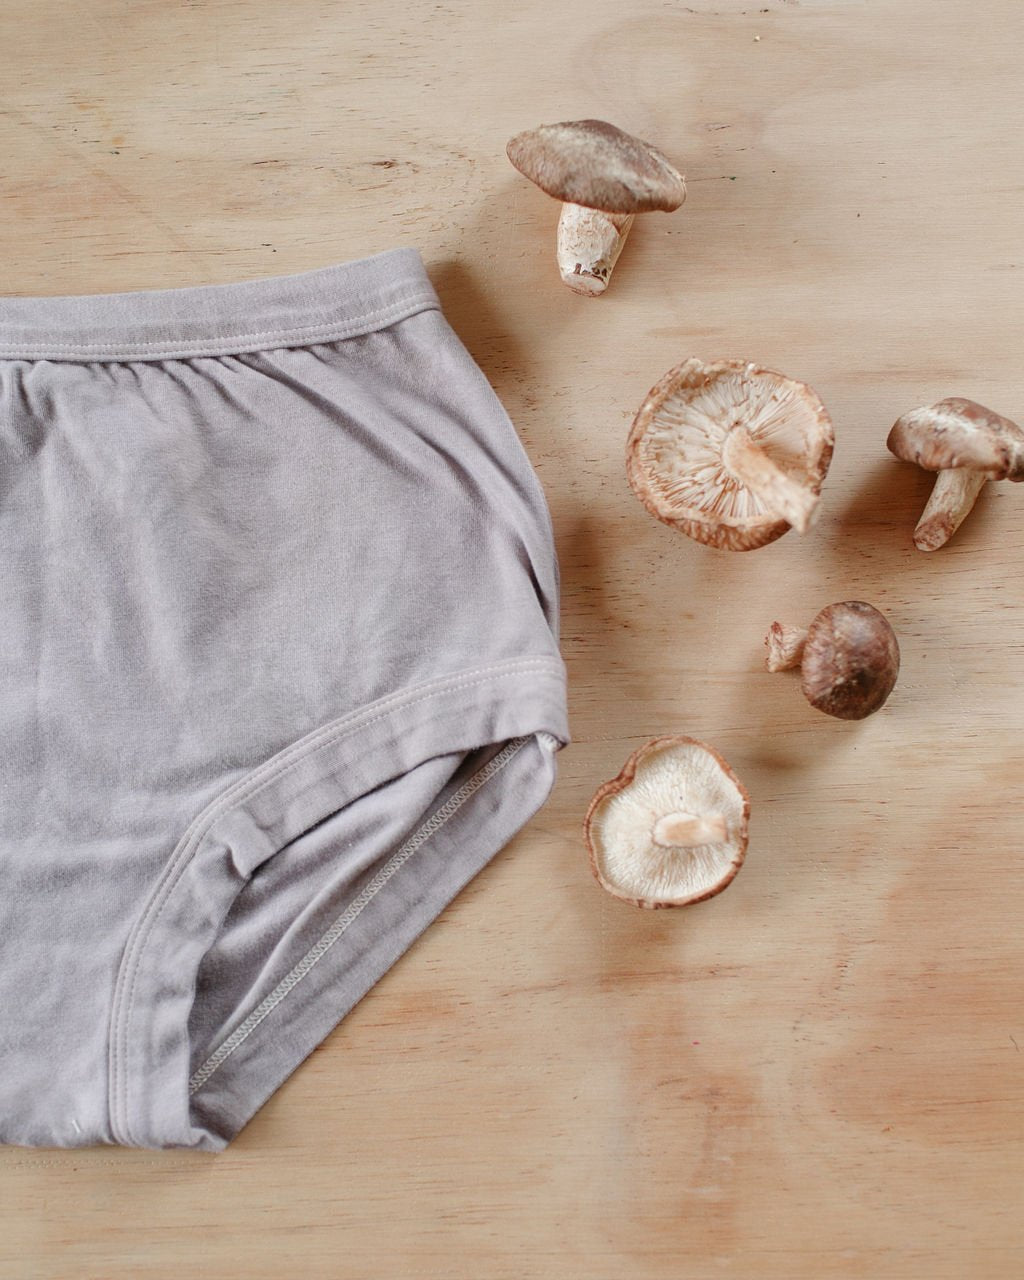 Flat lay of Thunderpants Organic Cotton Original underwear in hand dyed Shiitake color with shiitake mushrooms around.